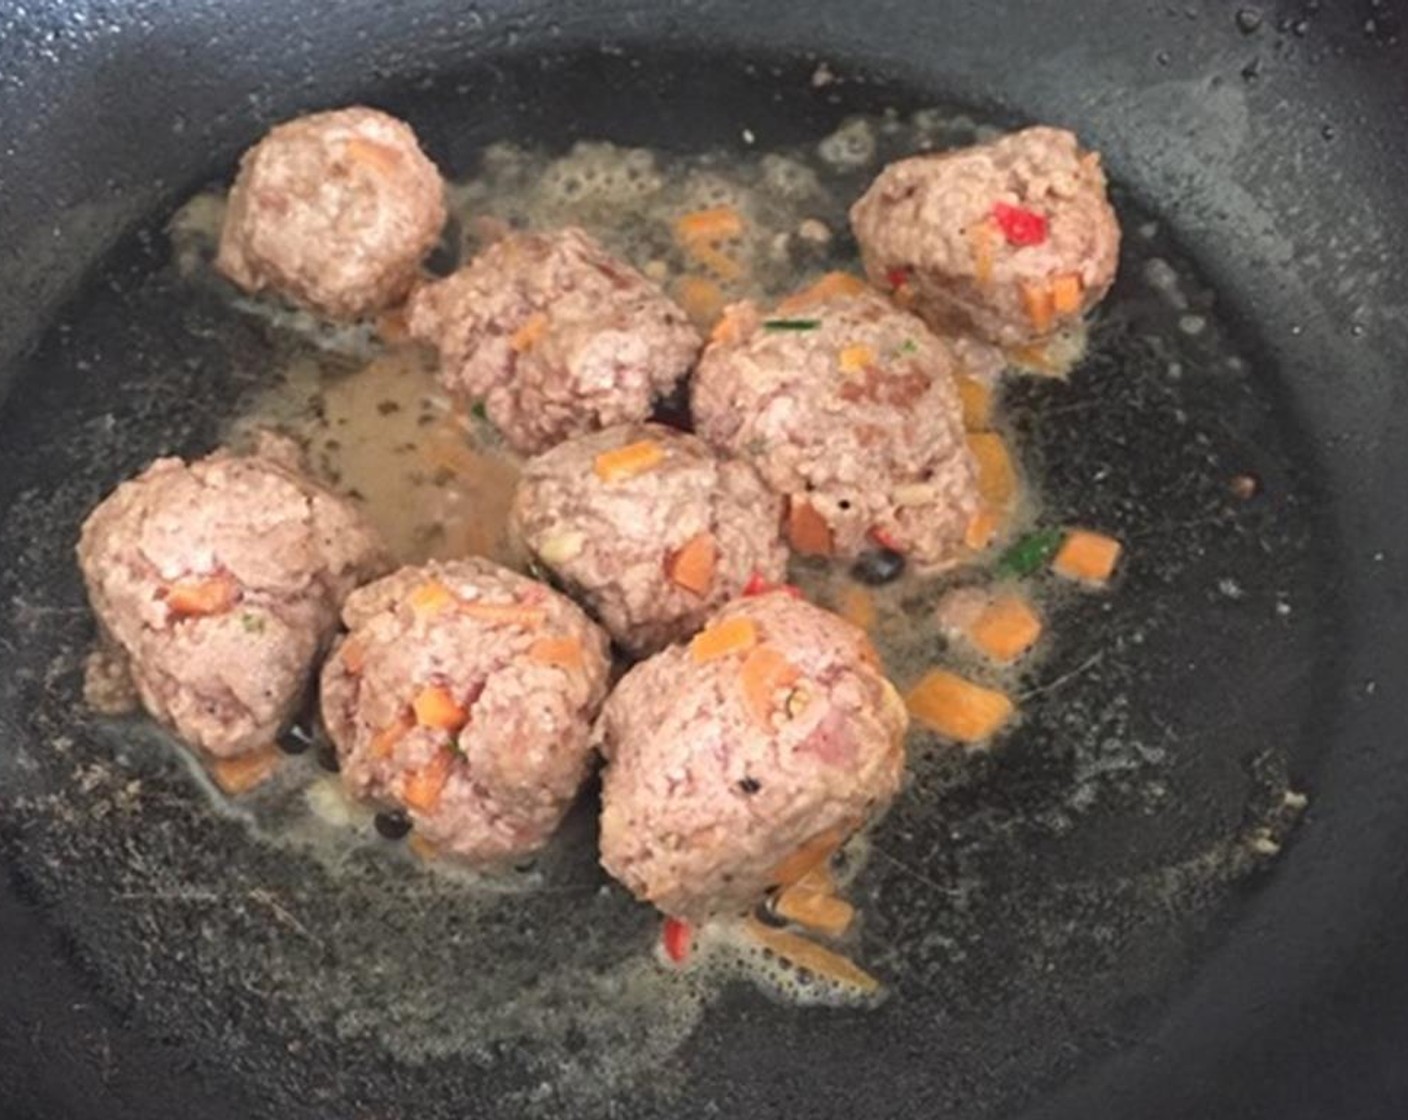 step 2 Put a frying pan over a heat and add Cooking Oil (1 Tbsp) and put the meatballs in. Keep turning until they're browned all over. It takes a few minutes.